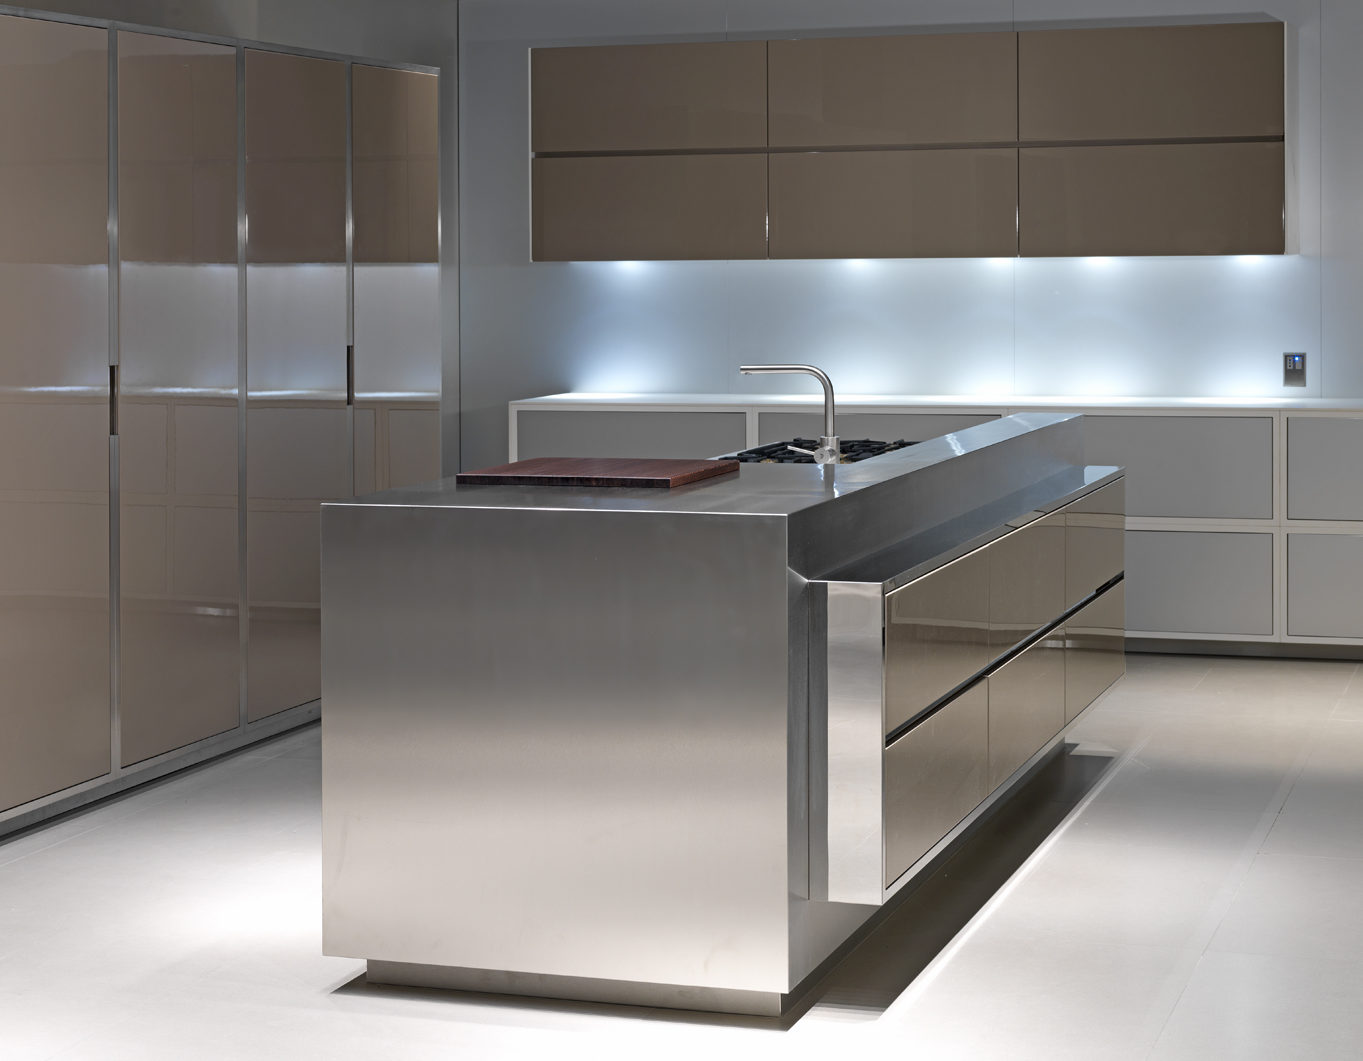 Strato_design_20.10_bespoke-kitchen-project-in-Milano_mat-stainless-steel_hig-gloss-lacquer-Tortora-colour_03